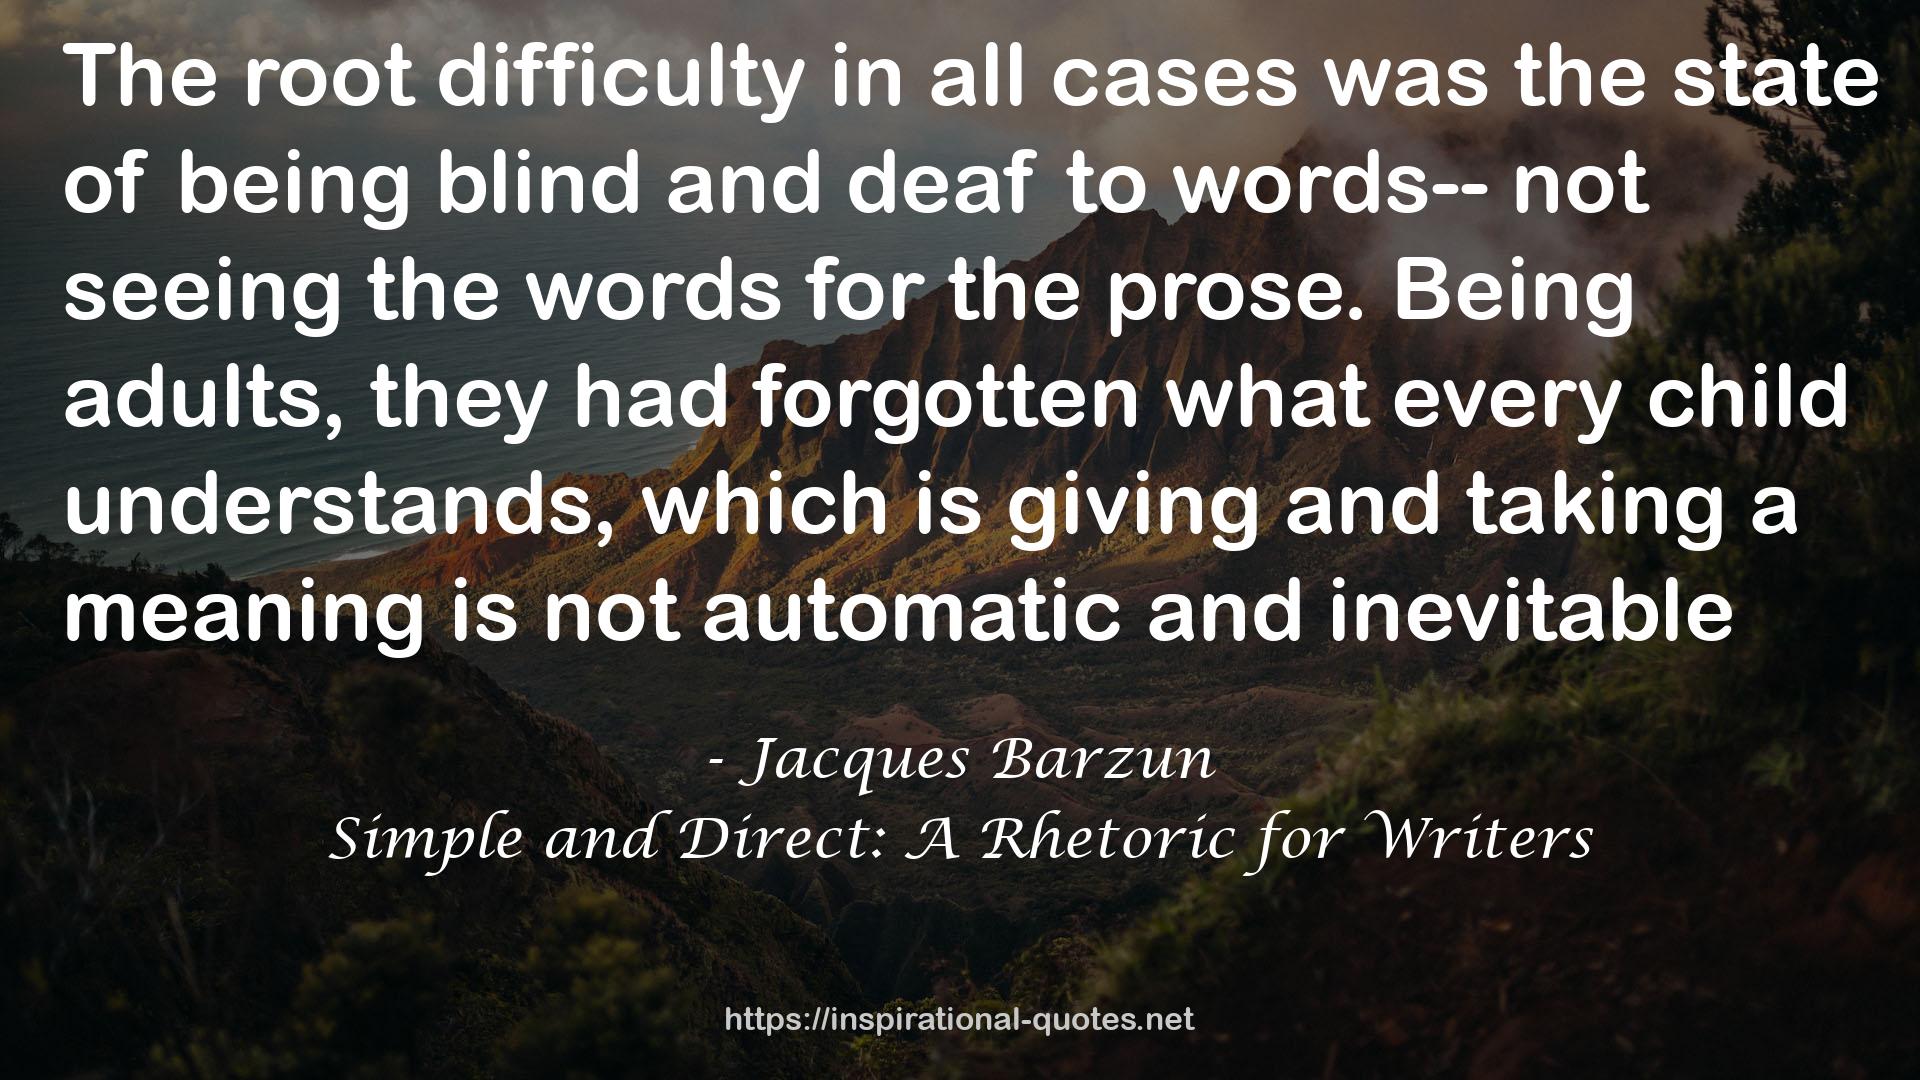 Simple and Direct: A Rhetoric for Writers QUOTES